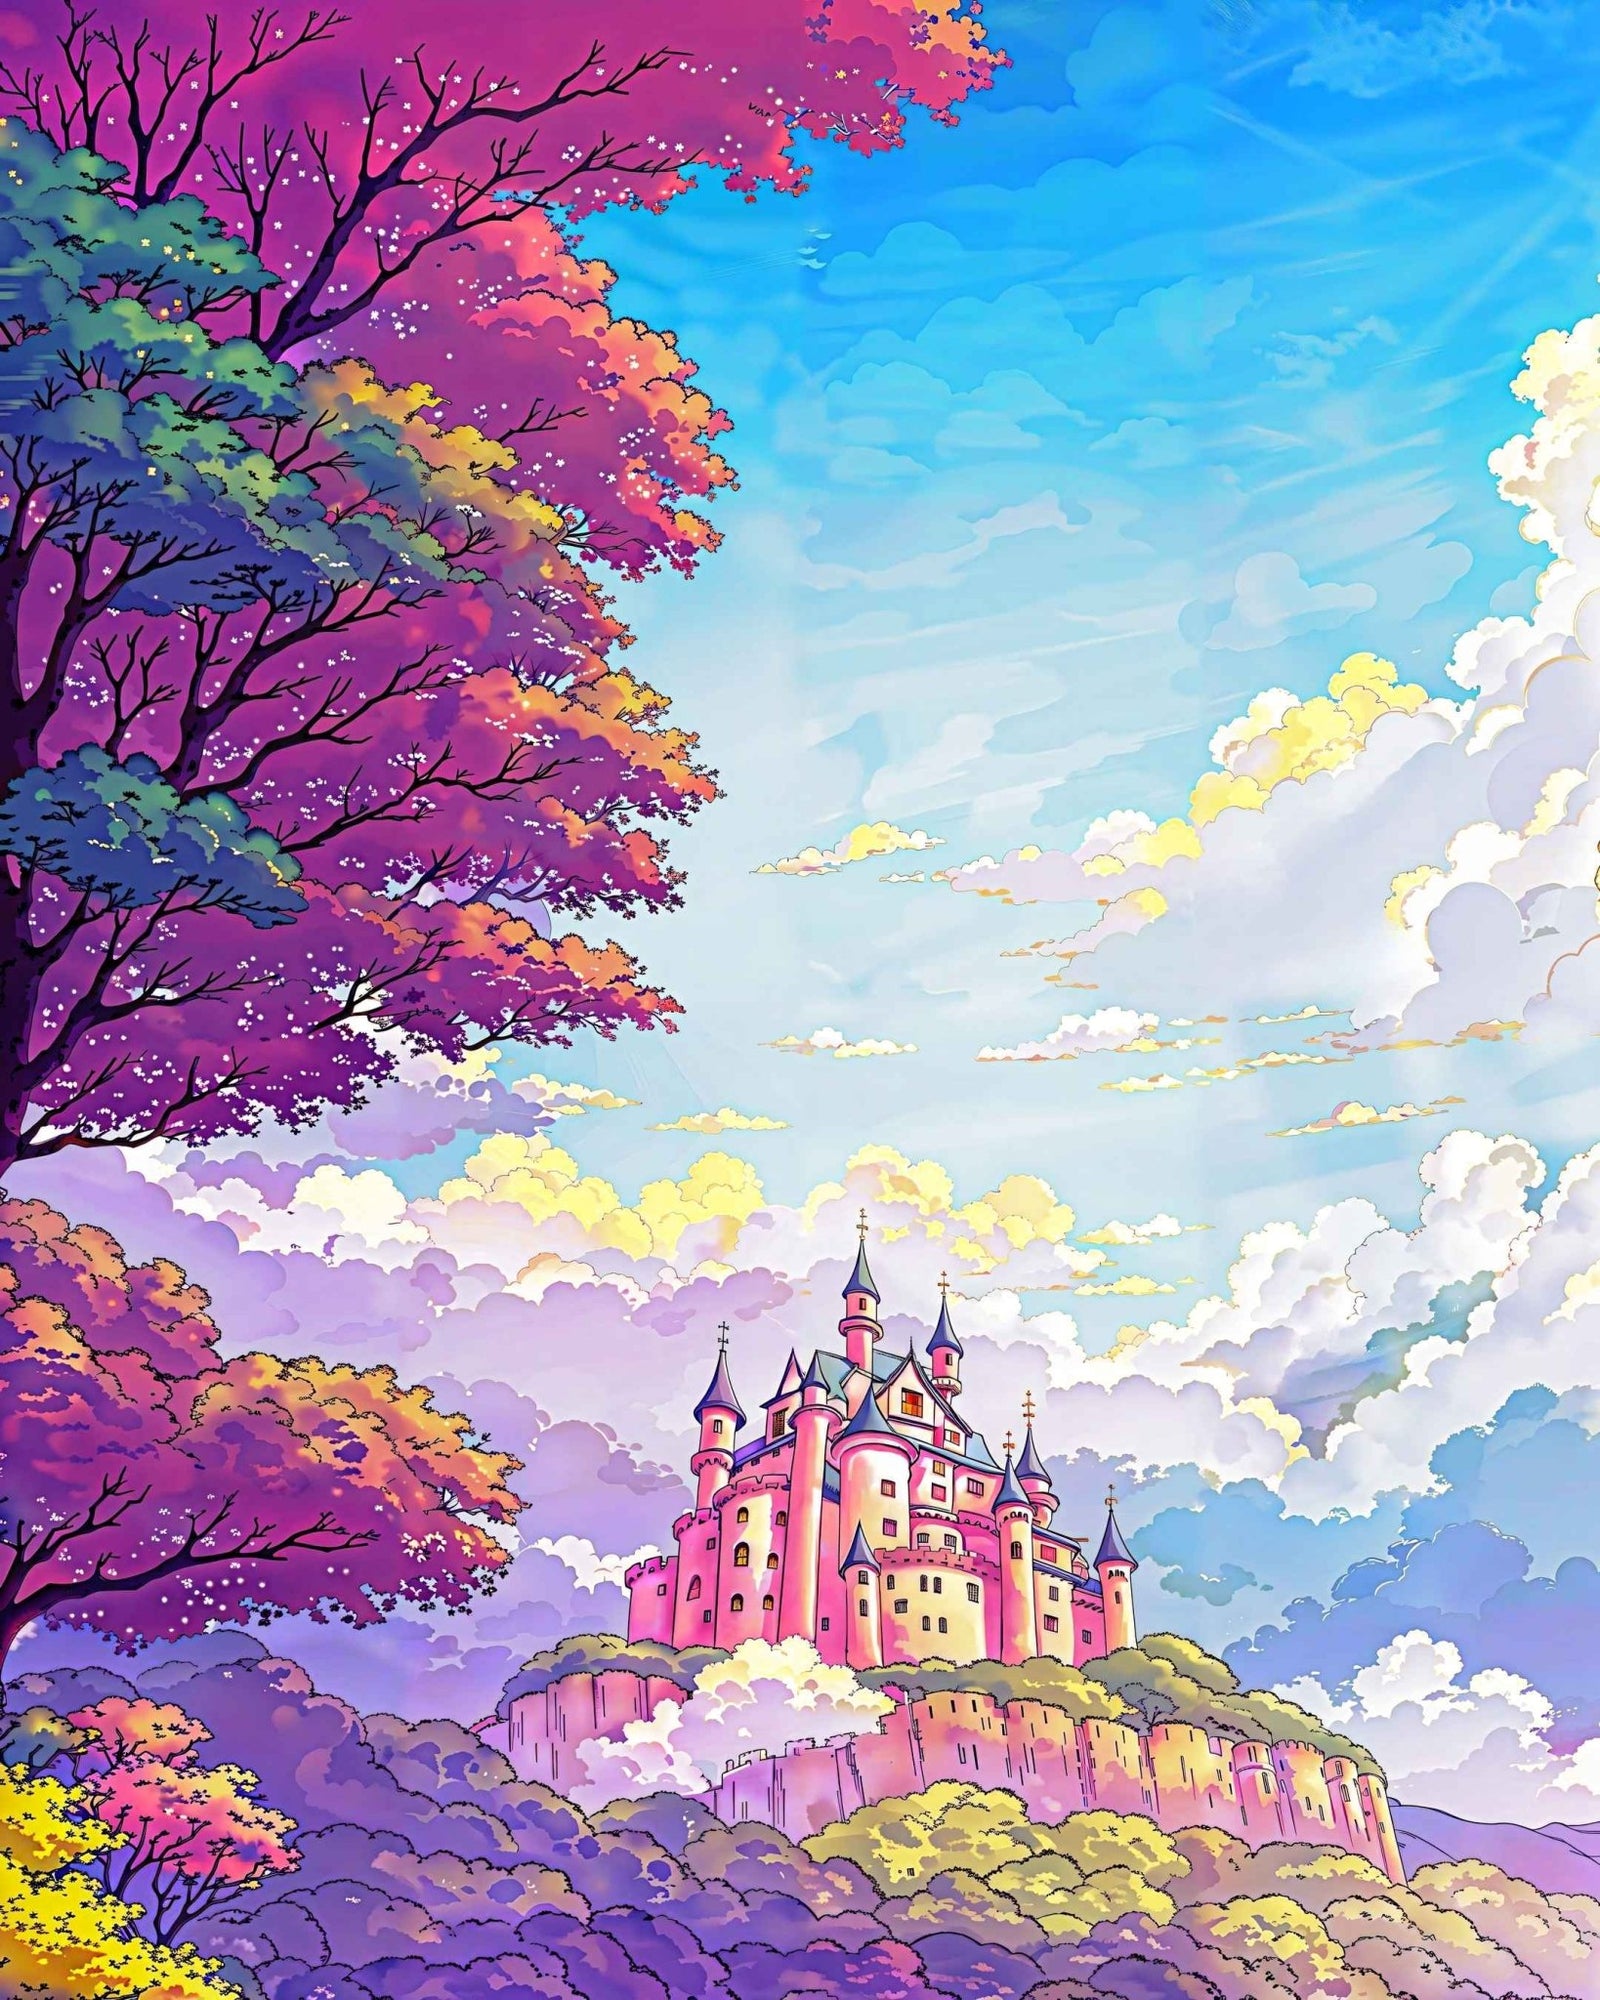 Lover's castle - Poster - Ever colorful